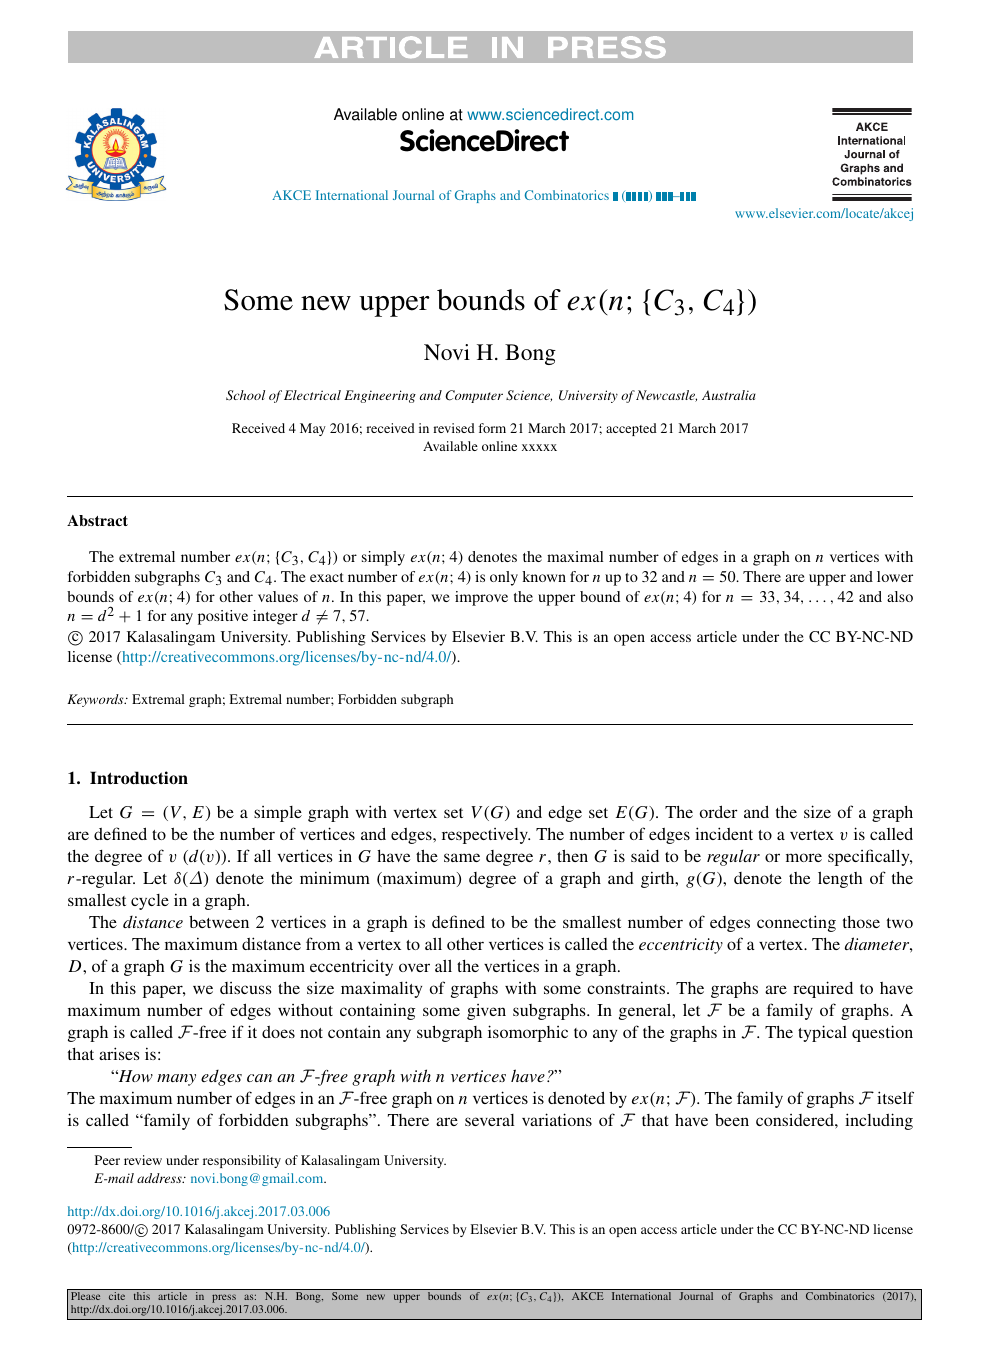 Some New Upper Bounds Of E X N C 3 C 4 Topic Of Research Paper In Mathematics Download Scholarly Article Pdf And Read For Free On Cyberleninka Open Science Hub